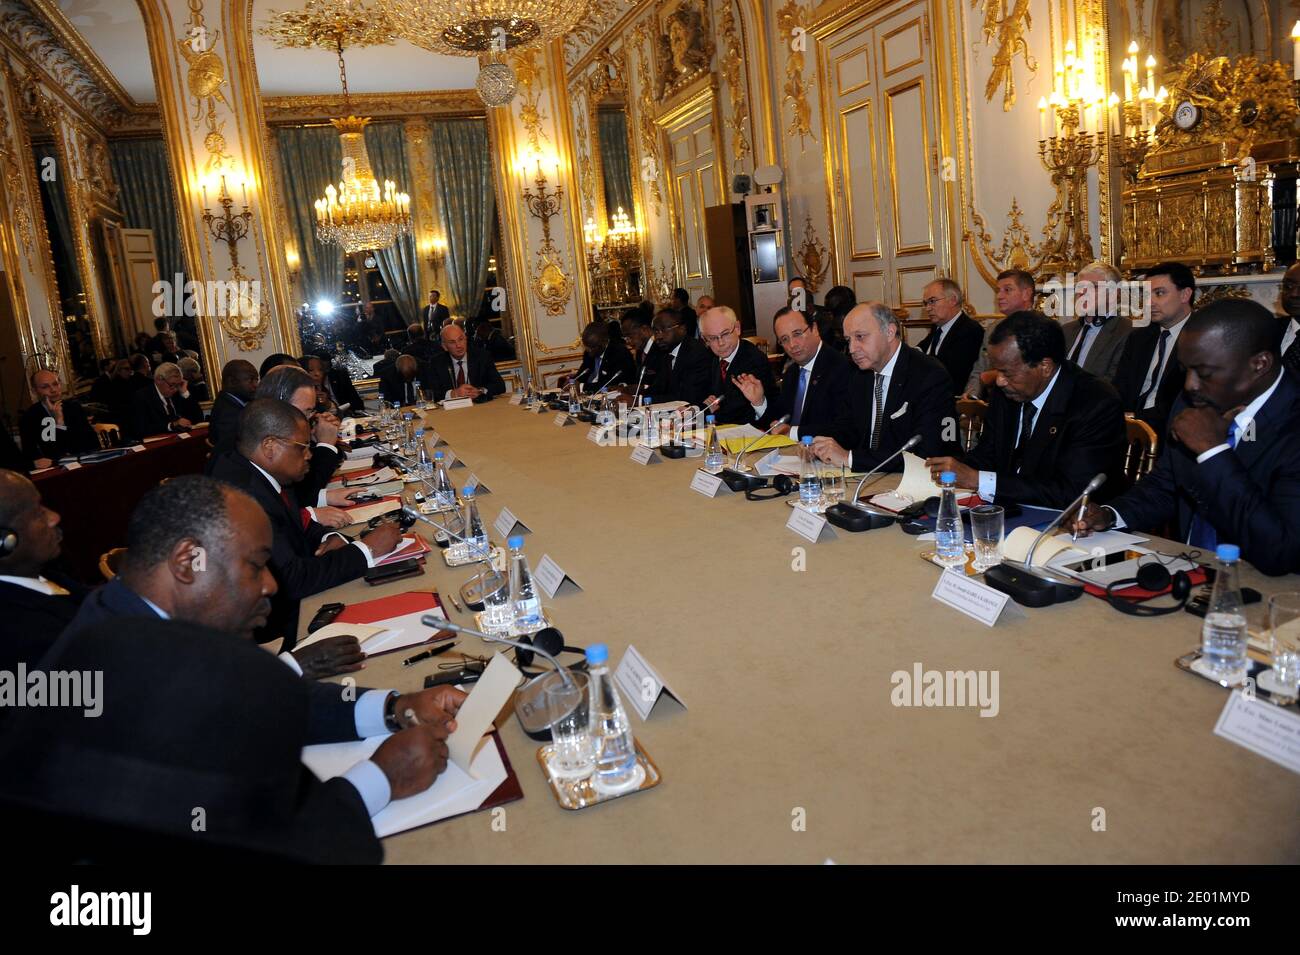 Central African Republic Prime Minister Nicolas Tiangaye (2nd L from bottom) takes part in a meeting about the situation in his country with Gabon's president Ali Bongo Ondimba (1st L), the President of the European Council Herman Van Rompuy (5th R), the French President Francois Hollande (4th R), the French Minister of Foreign Affairs Laurent Fabius (3rd R), and Cameroon's President Paul Biya (2nd R), as part of a Summit for peace and safety in Africa at the Elysee presidential palace, on December 7, 2013, in Paris, France. Hollande on December 6 told African leaders it is time for their cont Stock Photo